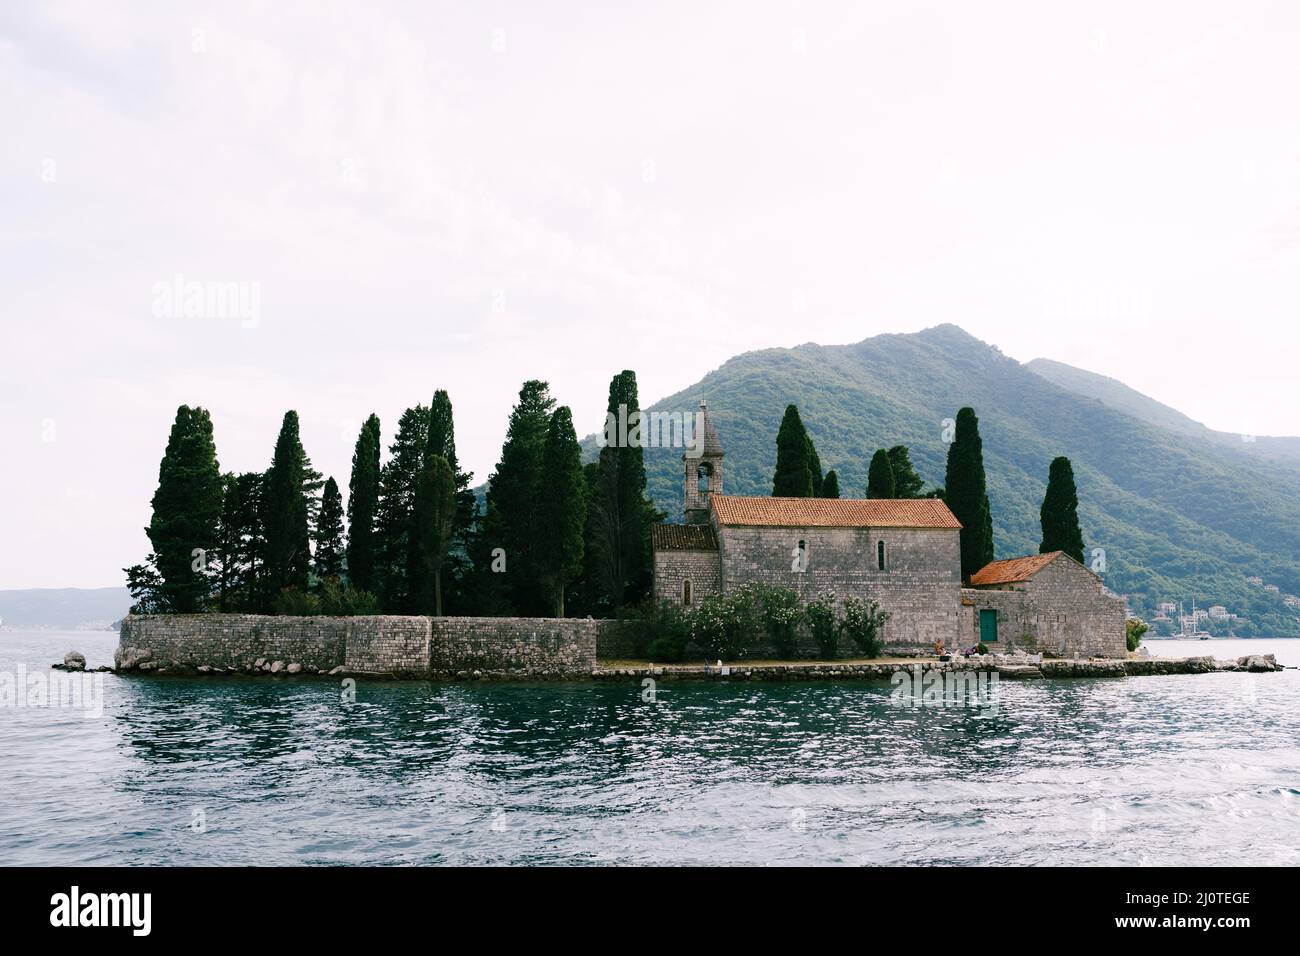 Tall century-old cypresses around the monastery on the island of St. George. Montenegro Stock Photo